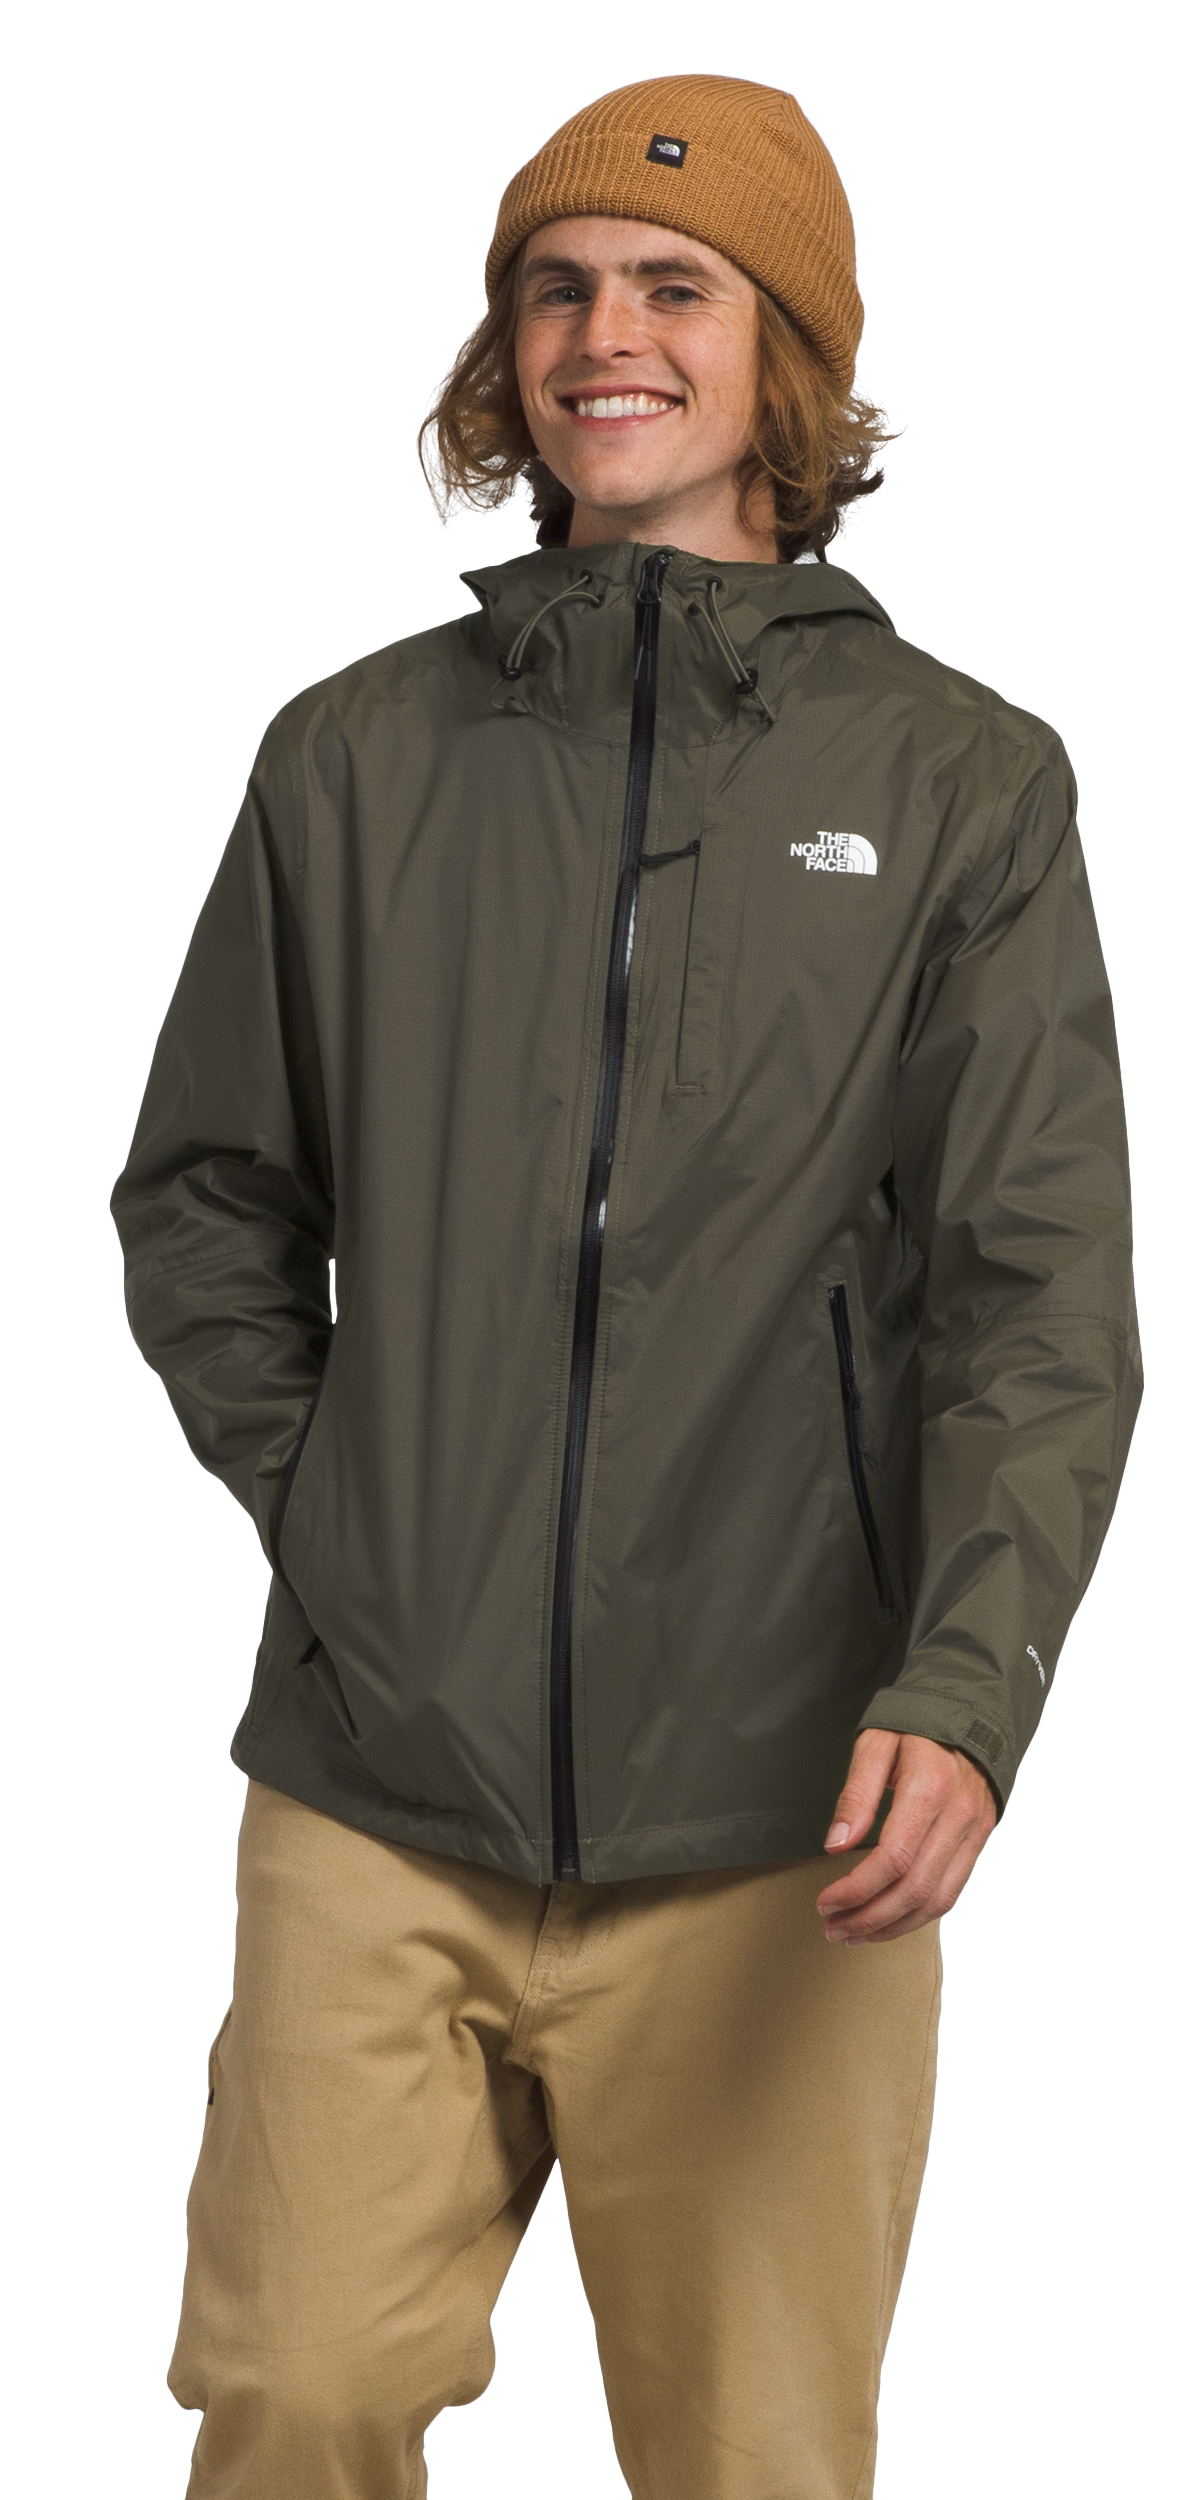 The North Face Alta Vista Jacket for Men - New Taupe Green - L